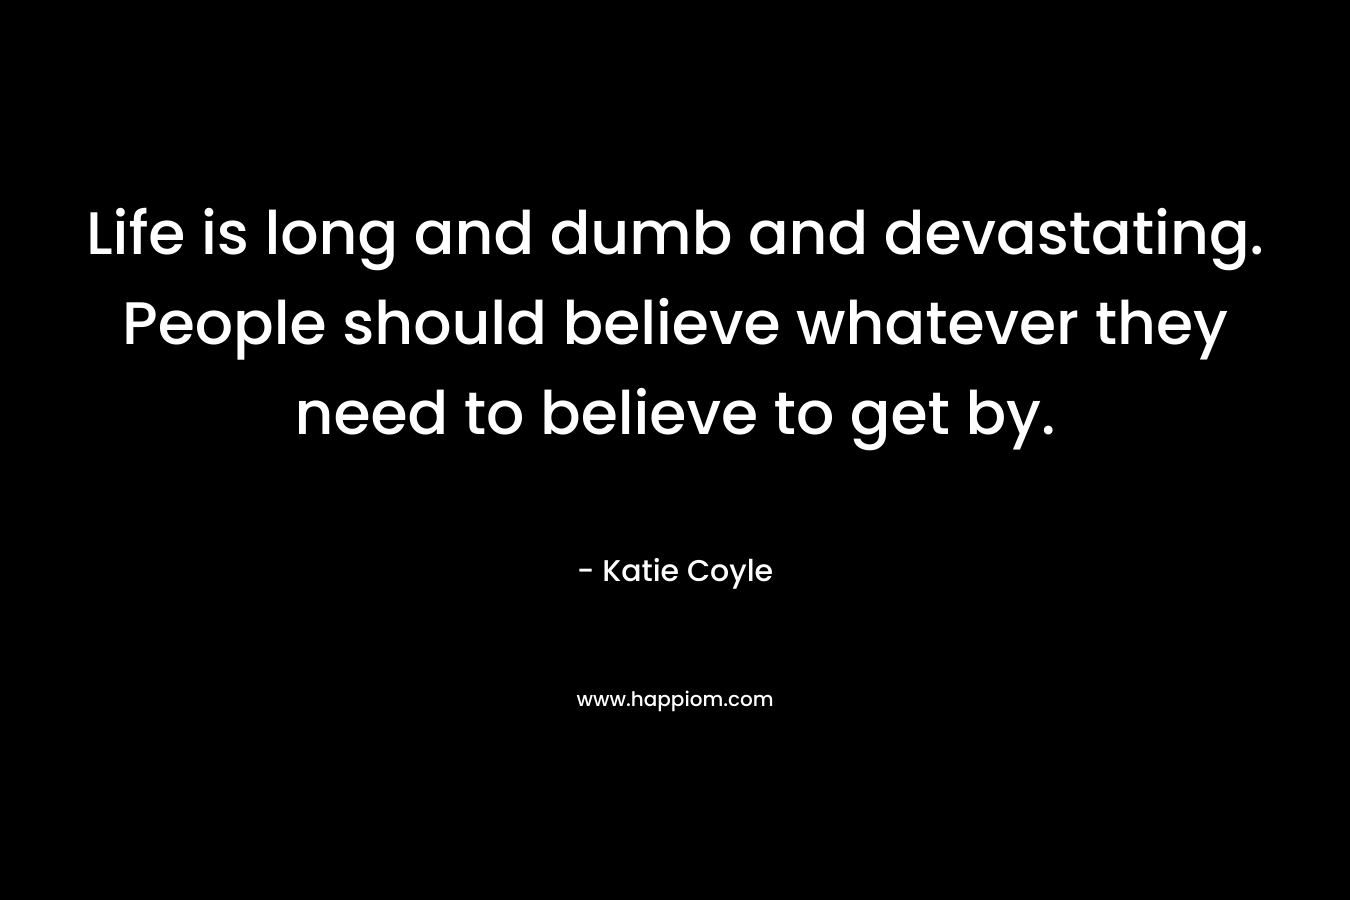 Life is long and dumb and devastating. People should believe whatever they need to believe to get by. – Katie Coyle